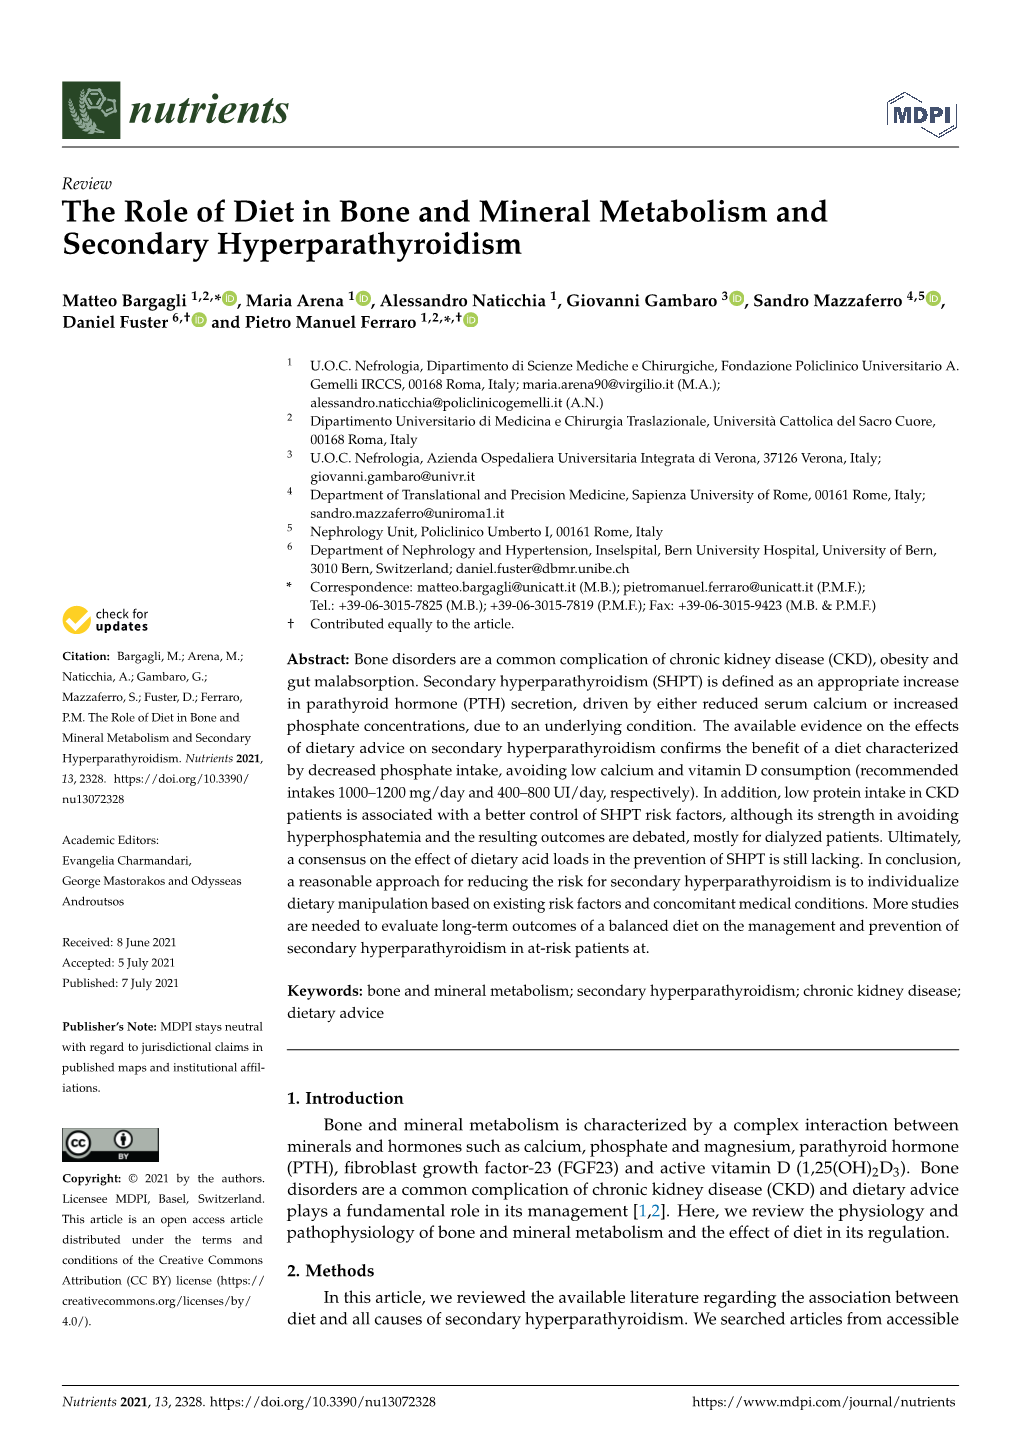 The Role of Diet in Bone and Mineral Metabolism and Secondary Hyperparathyroidism